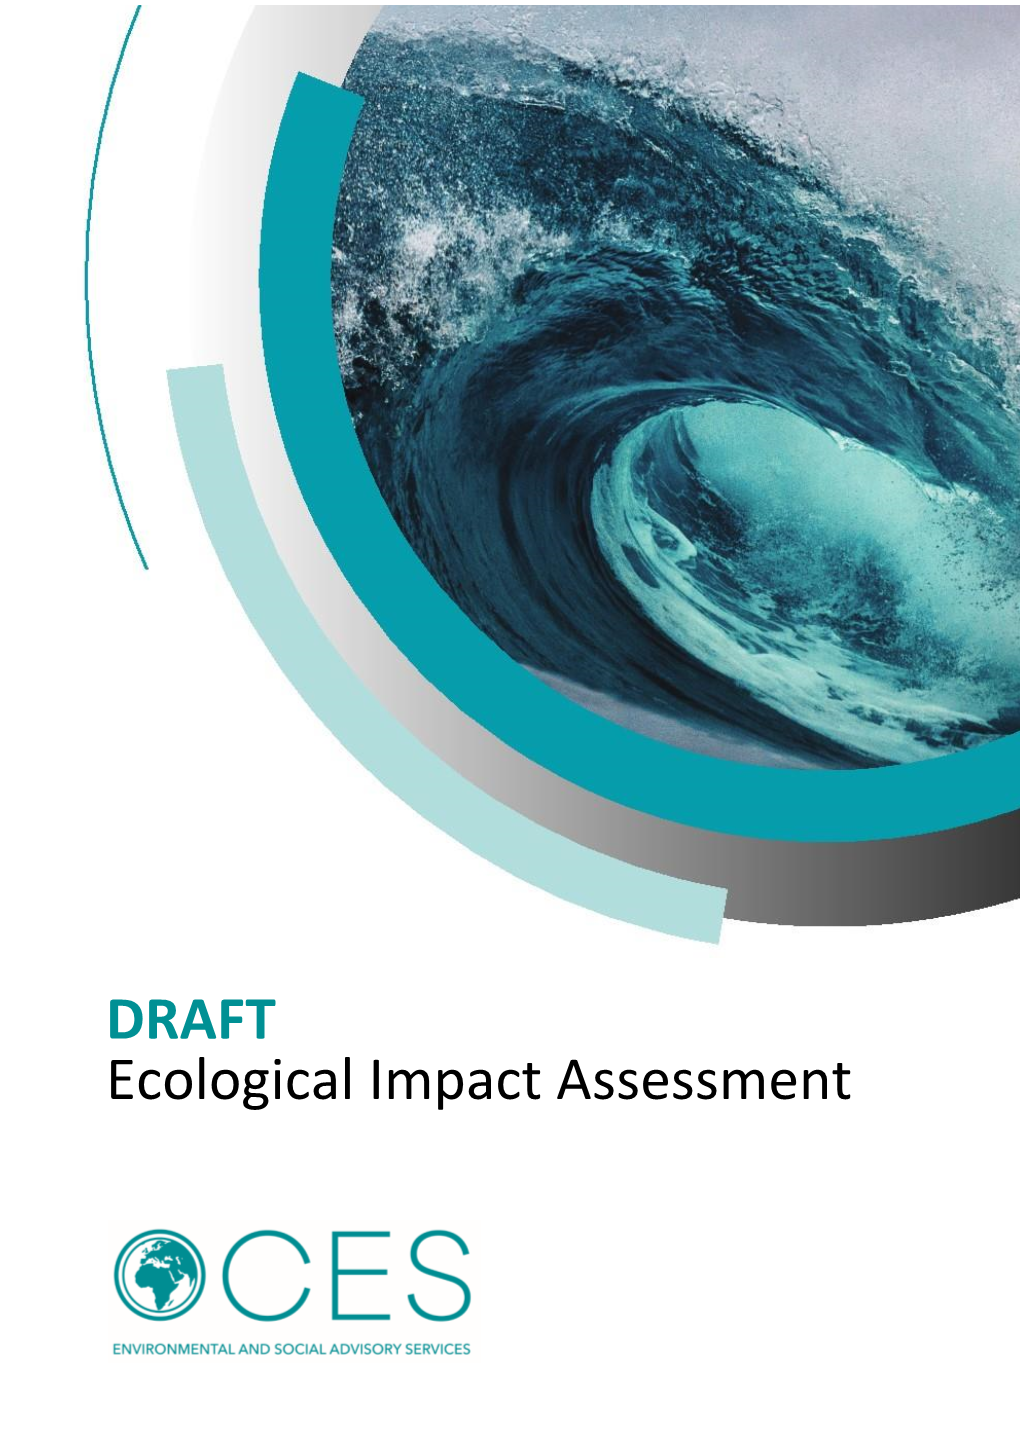 DRAFT Ecological Impact Assessment